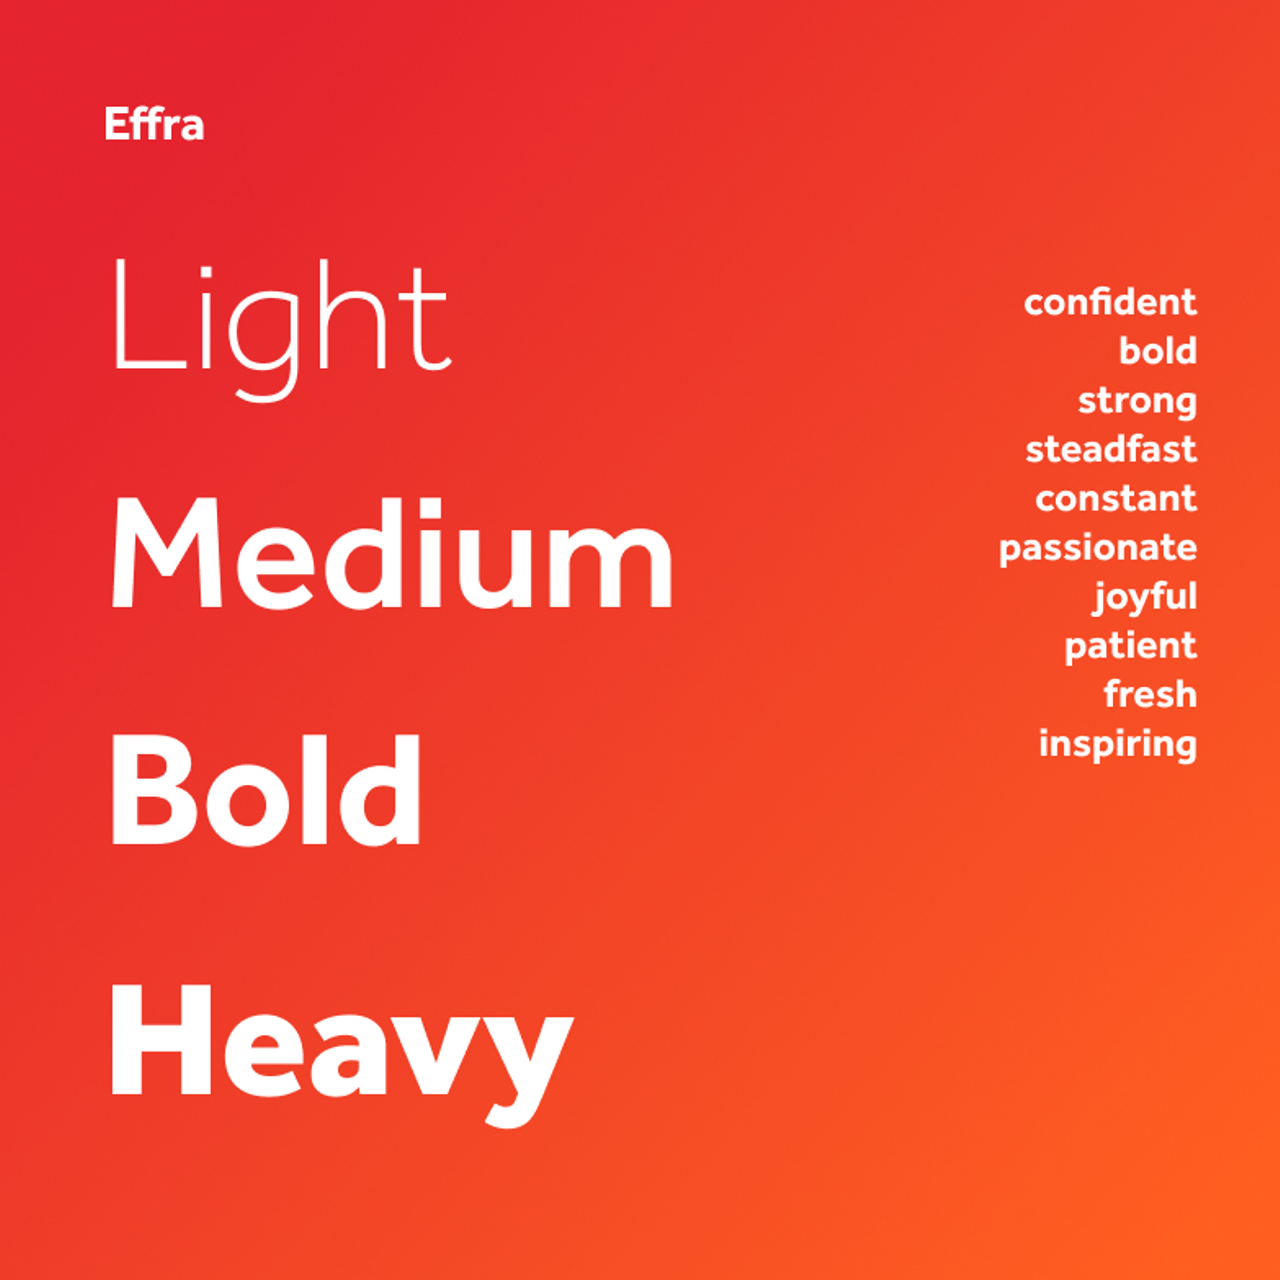 Sample of Effra typeface showing 'Light,' 'Medium,' 'Bold,' 'Heavy' font weights with corresponding attributes like 'confident' and 'inspiring' on a red background.